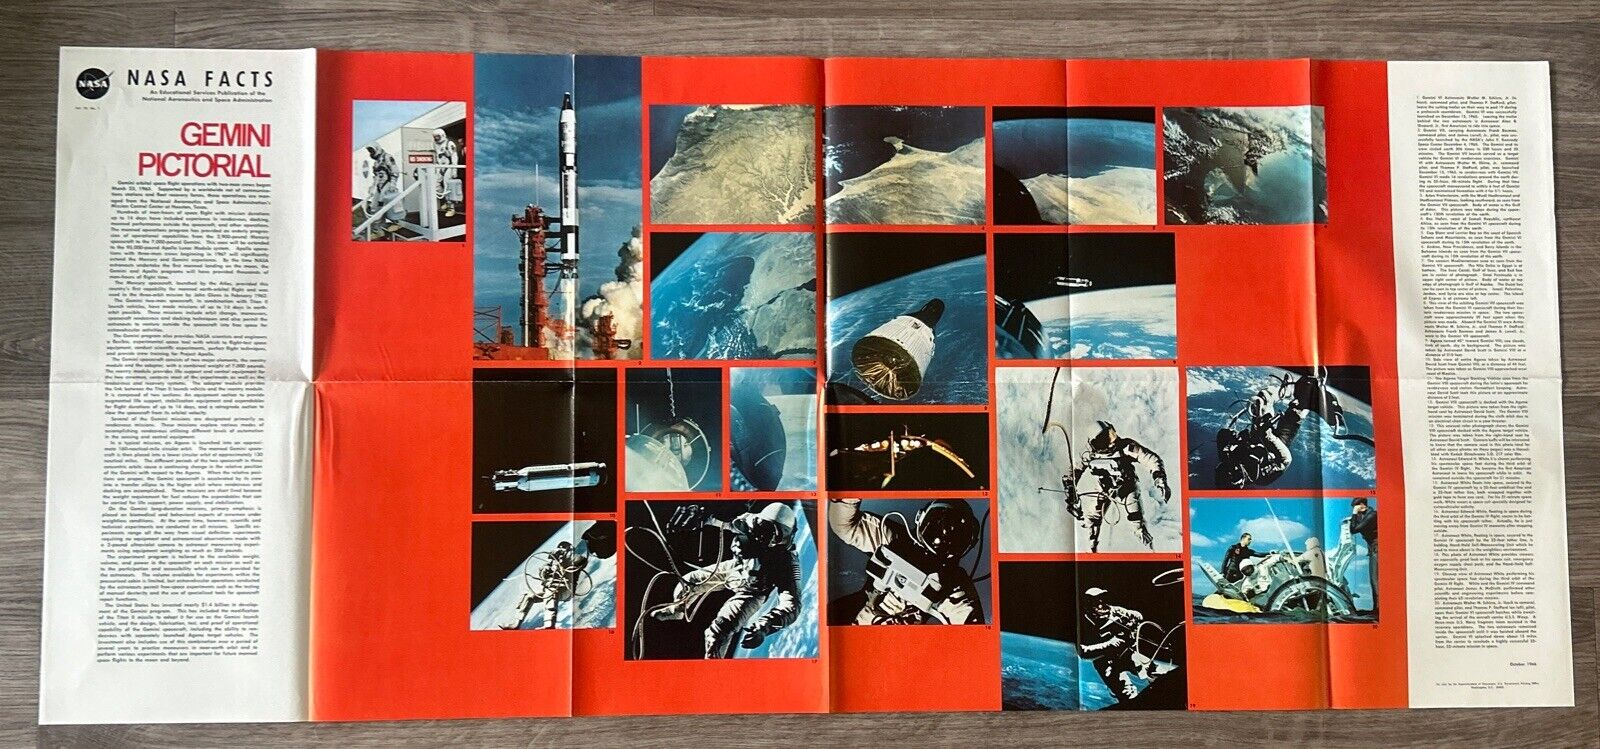 1966 NASA FACTS GEMINI PICTORIAL SPACE FLIGHT LARGE FOLD-OUT POSTER 21\